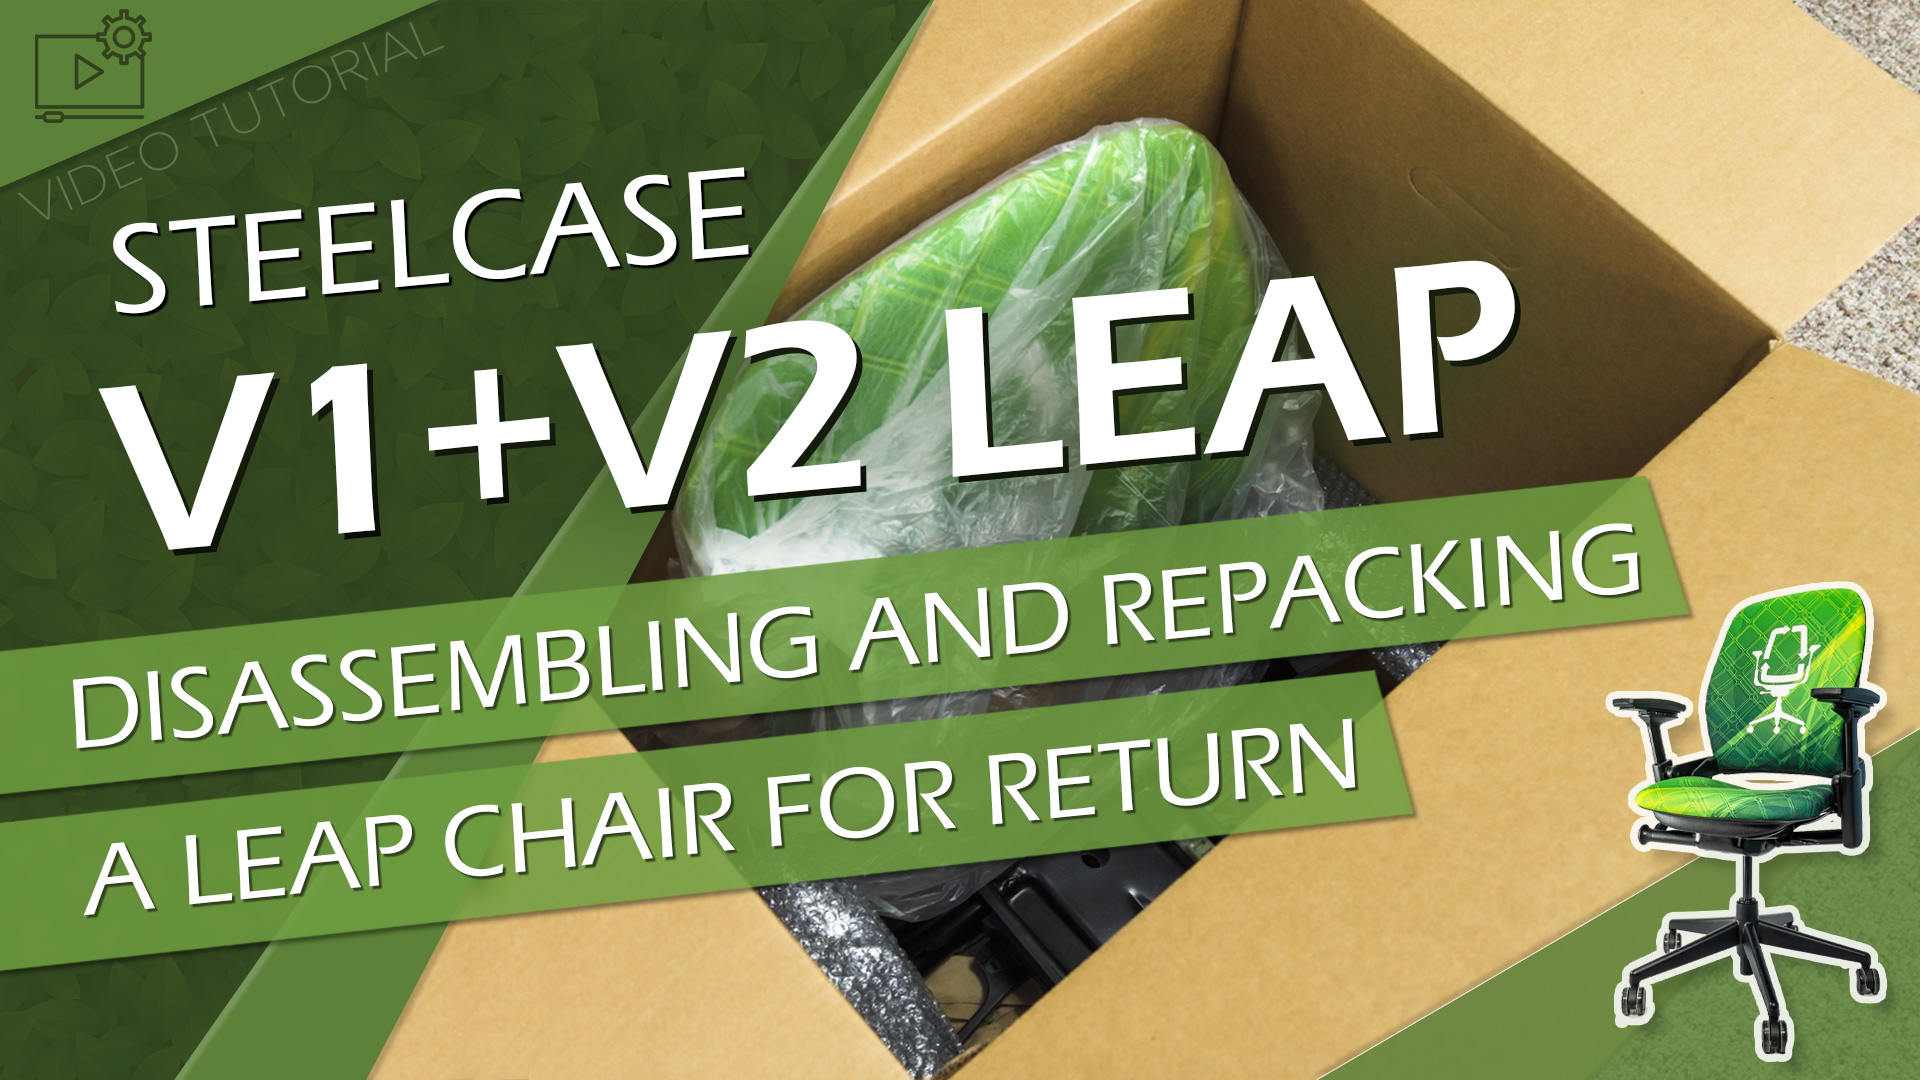 How To Disassemble And Repackage A Steelcase Leap Chair For Return Crandall Office Furniture